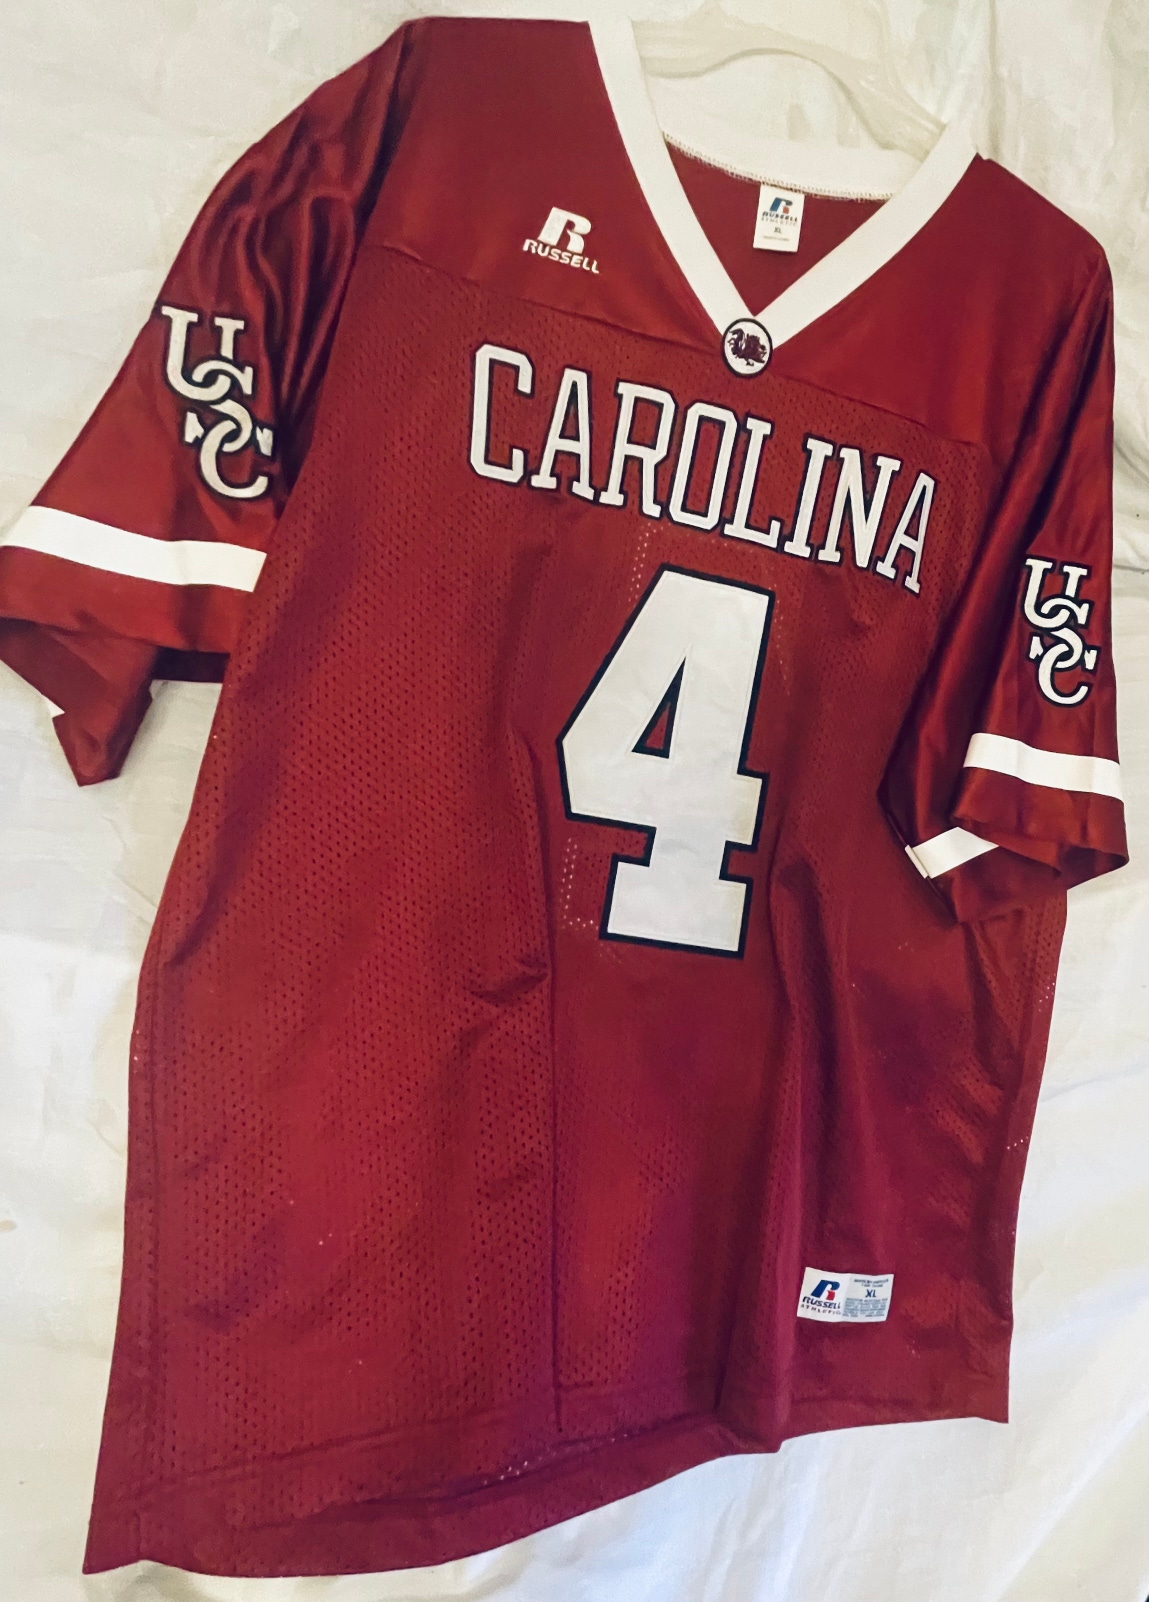 Gamecock Vintage Used XL football jersey